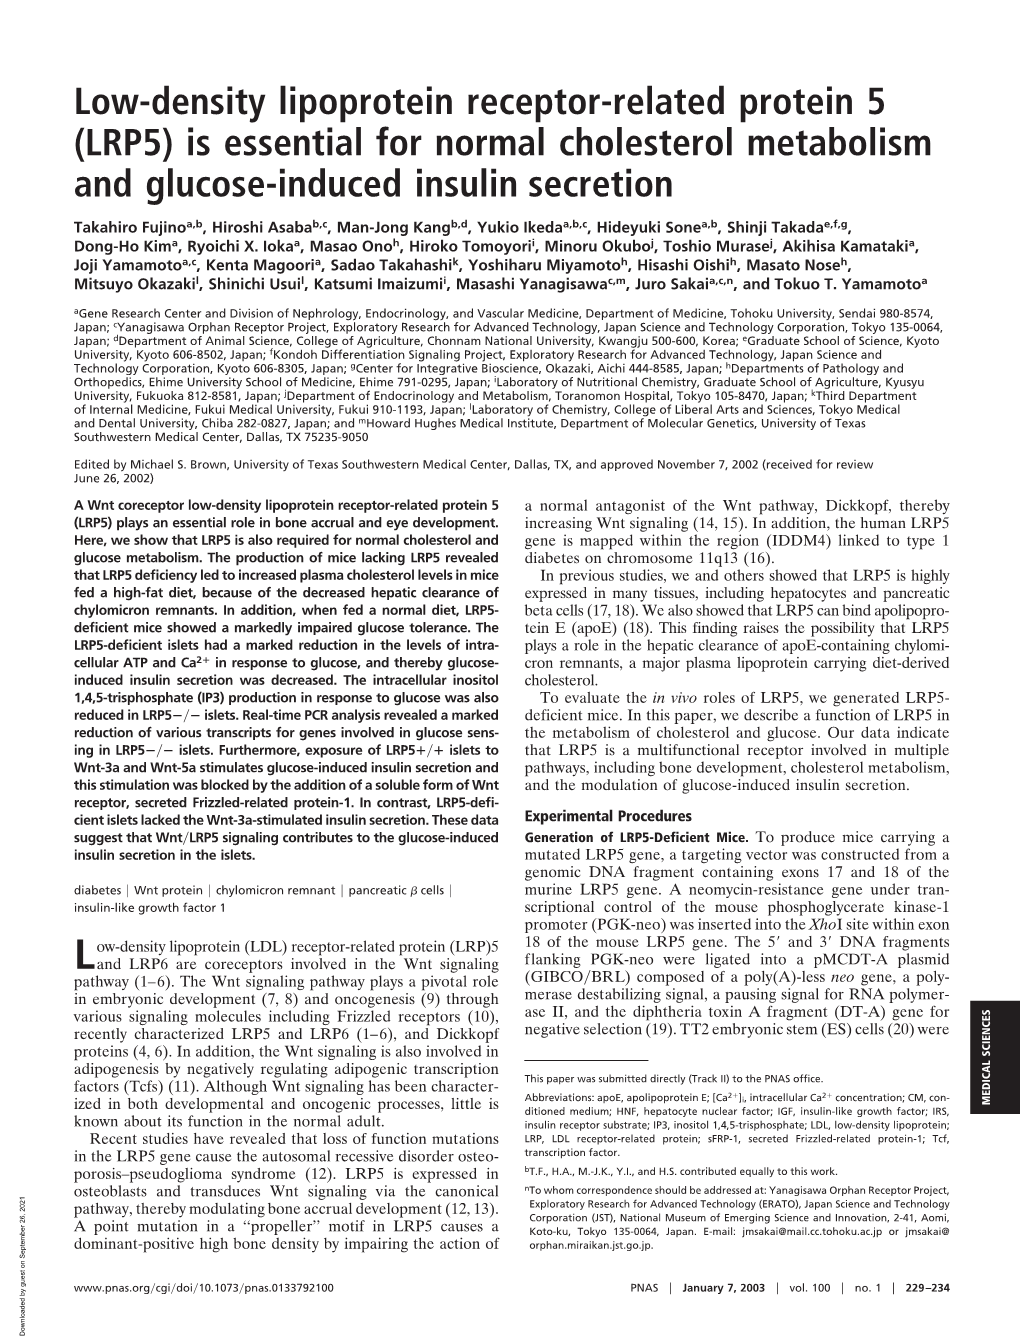 (LRP5) Is Essential for Normal Cholesterol Metabolism and Glucose-Induced Insulin Secretion